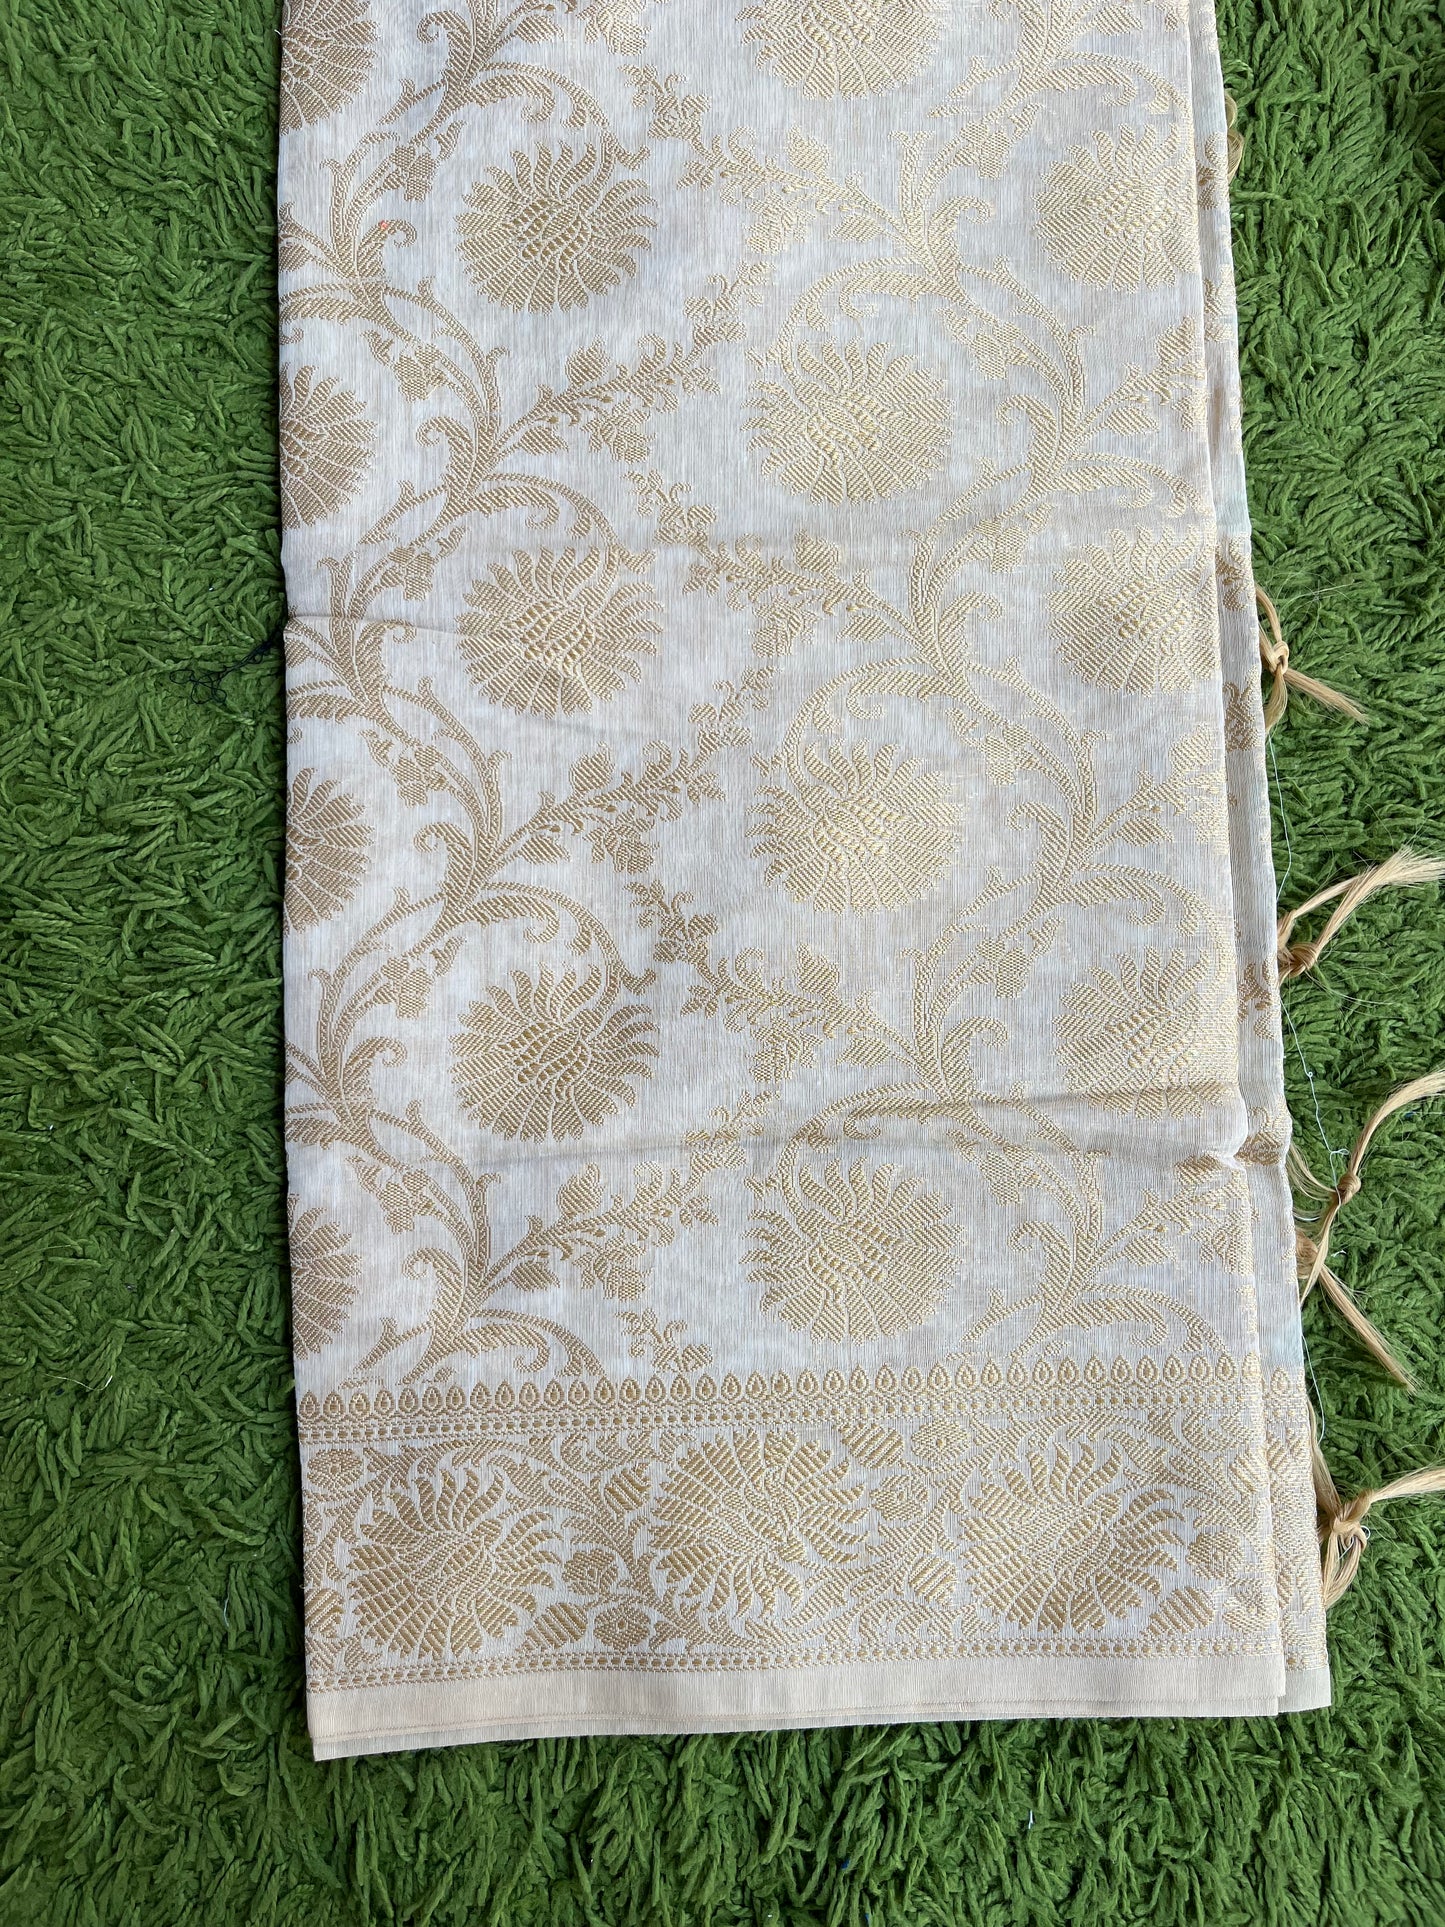 Banarasi Cotton Silk Dupatta with Floral Jaal - White and Gold